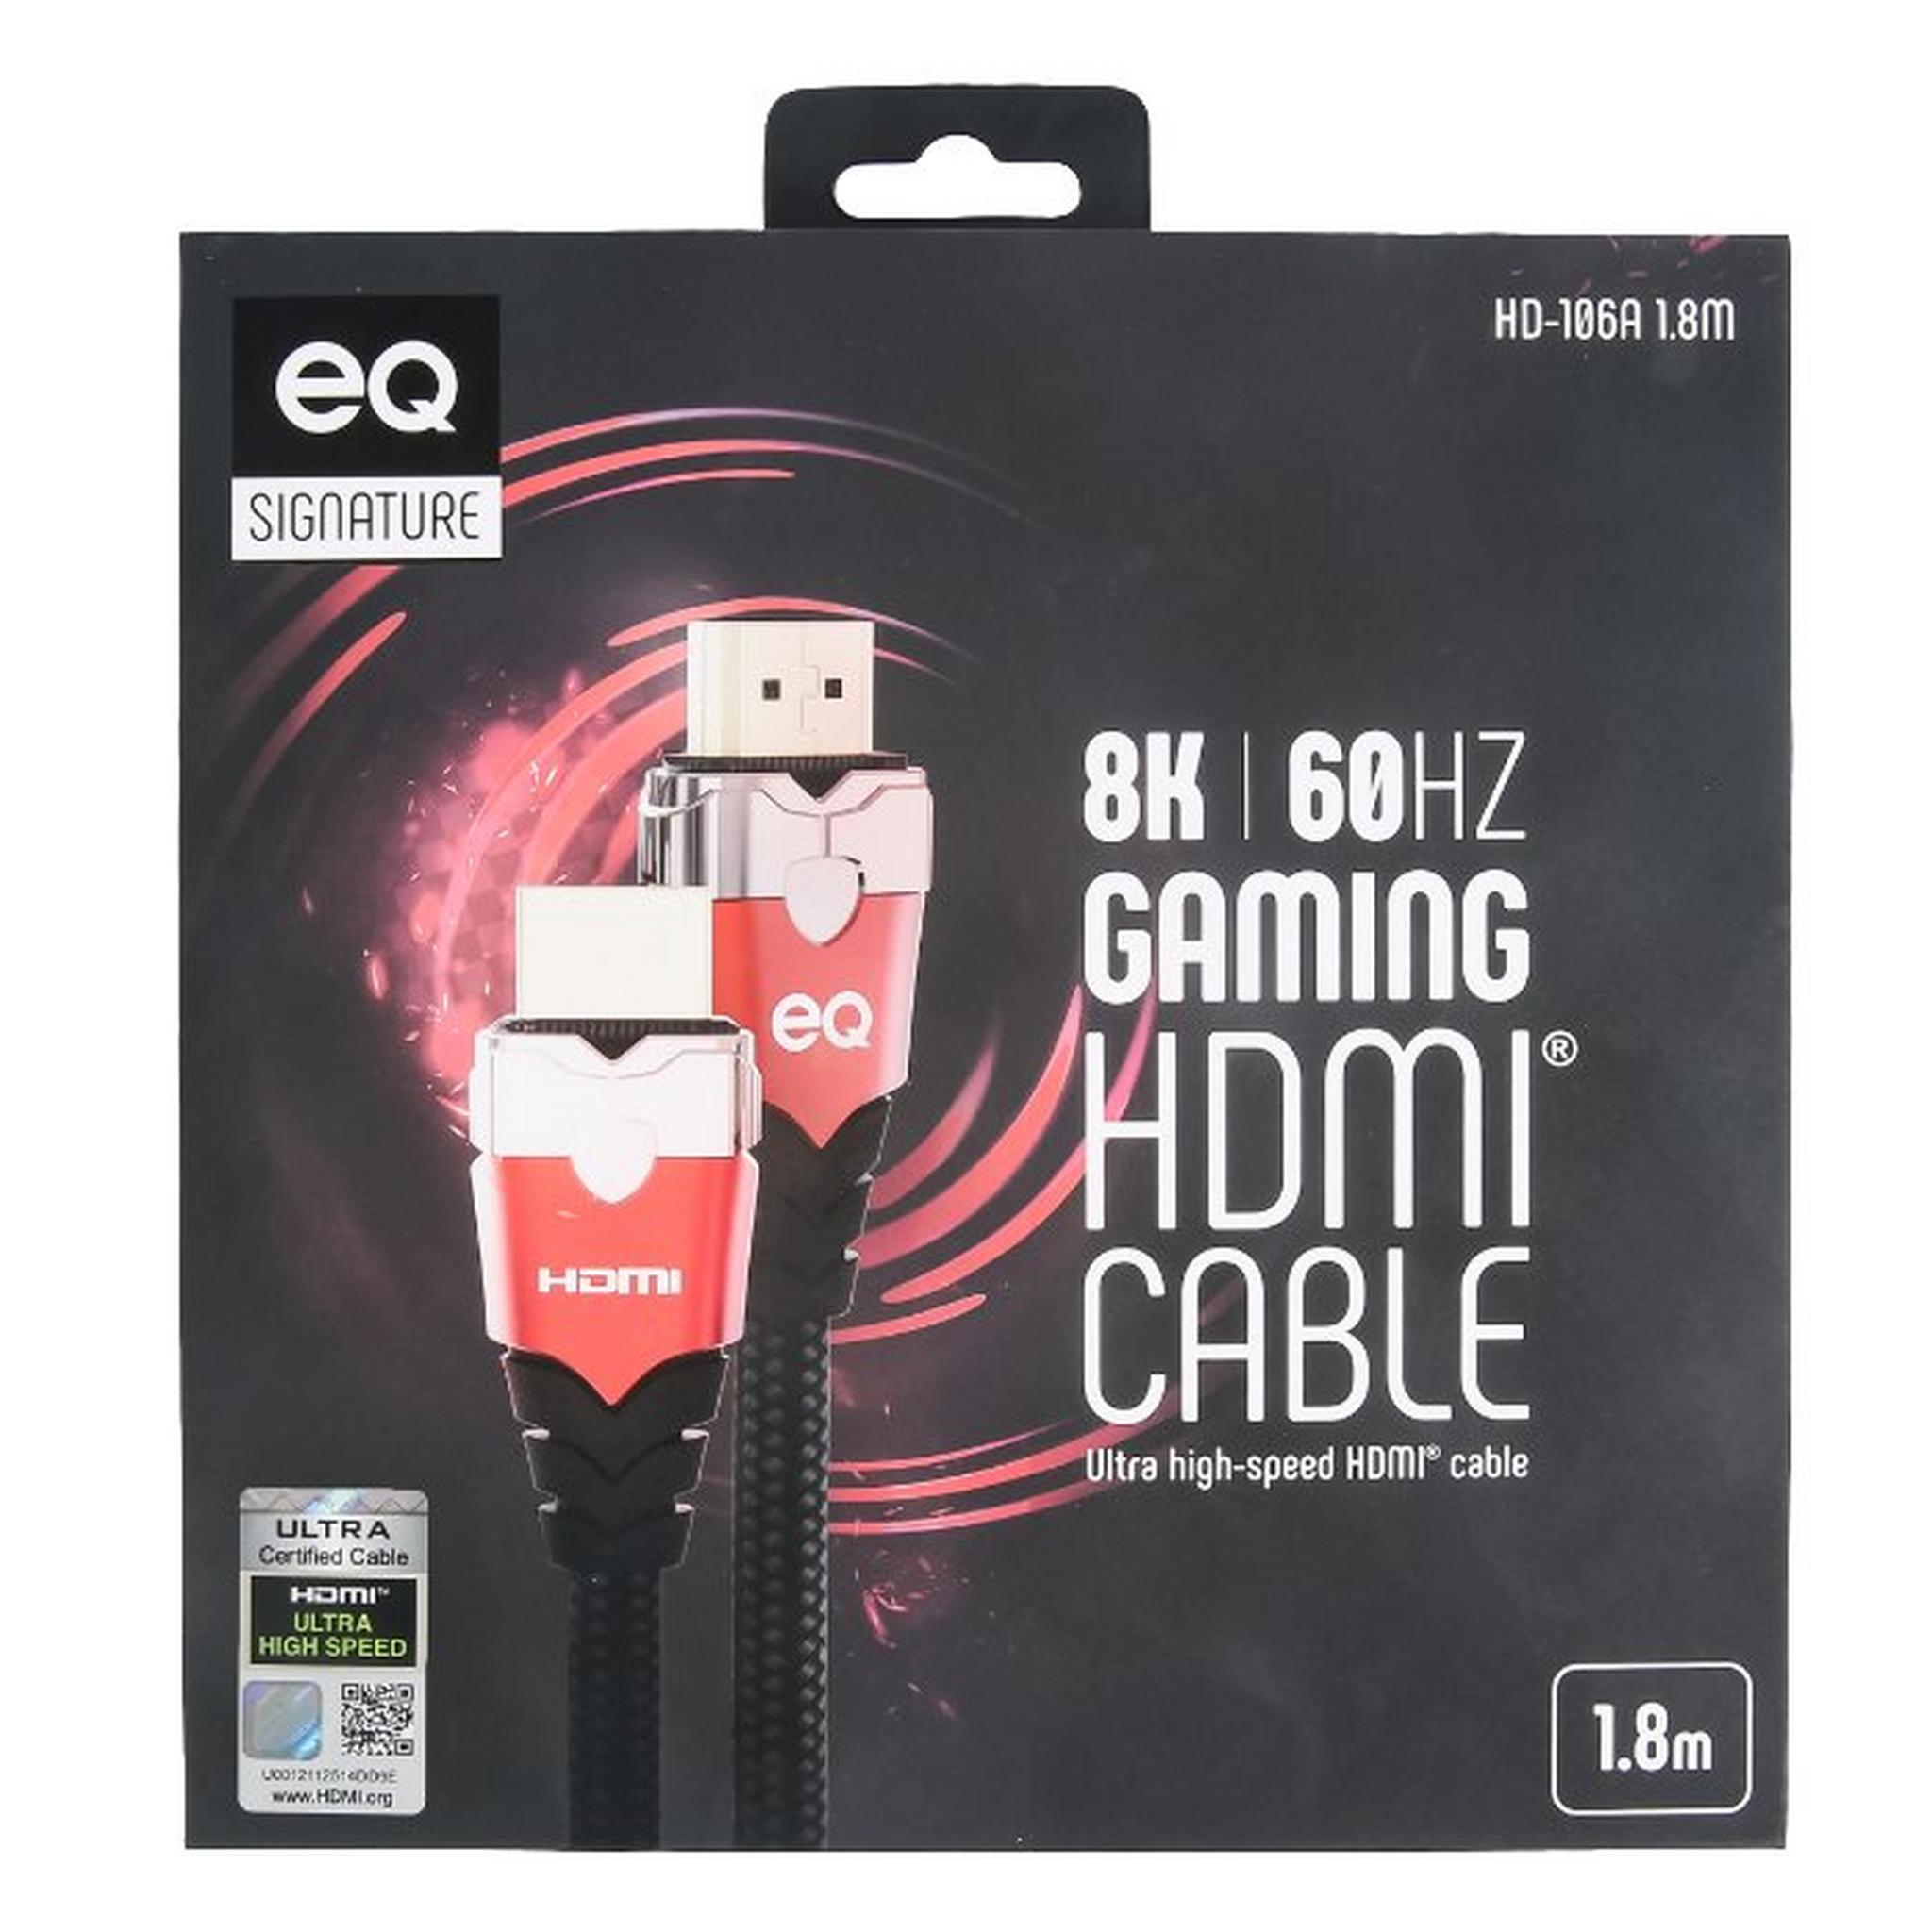 EQ 8K Gaming HDMI Cable, 1.8M, Up to 48Gbps, HD-106A - Black